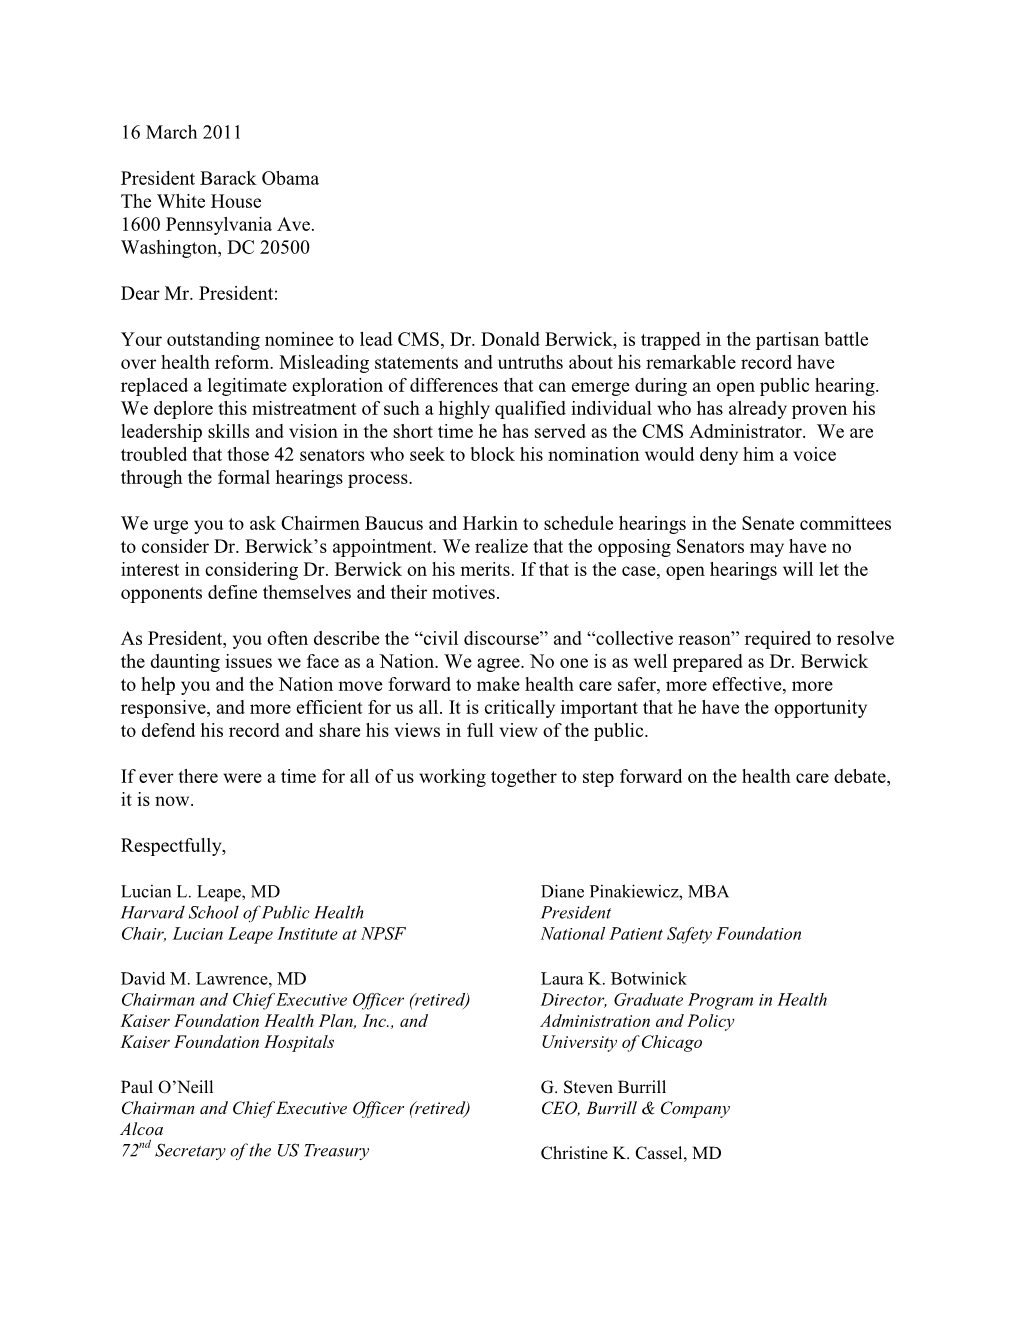 Letter to President Barack Obama Regarding the Nominee to Lead